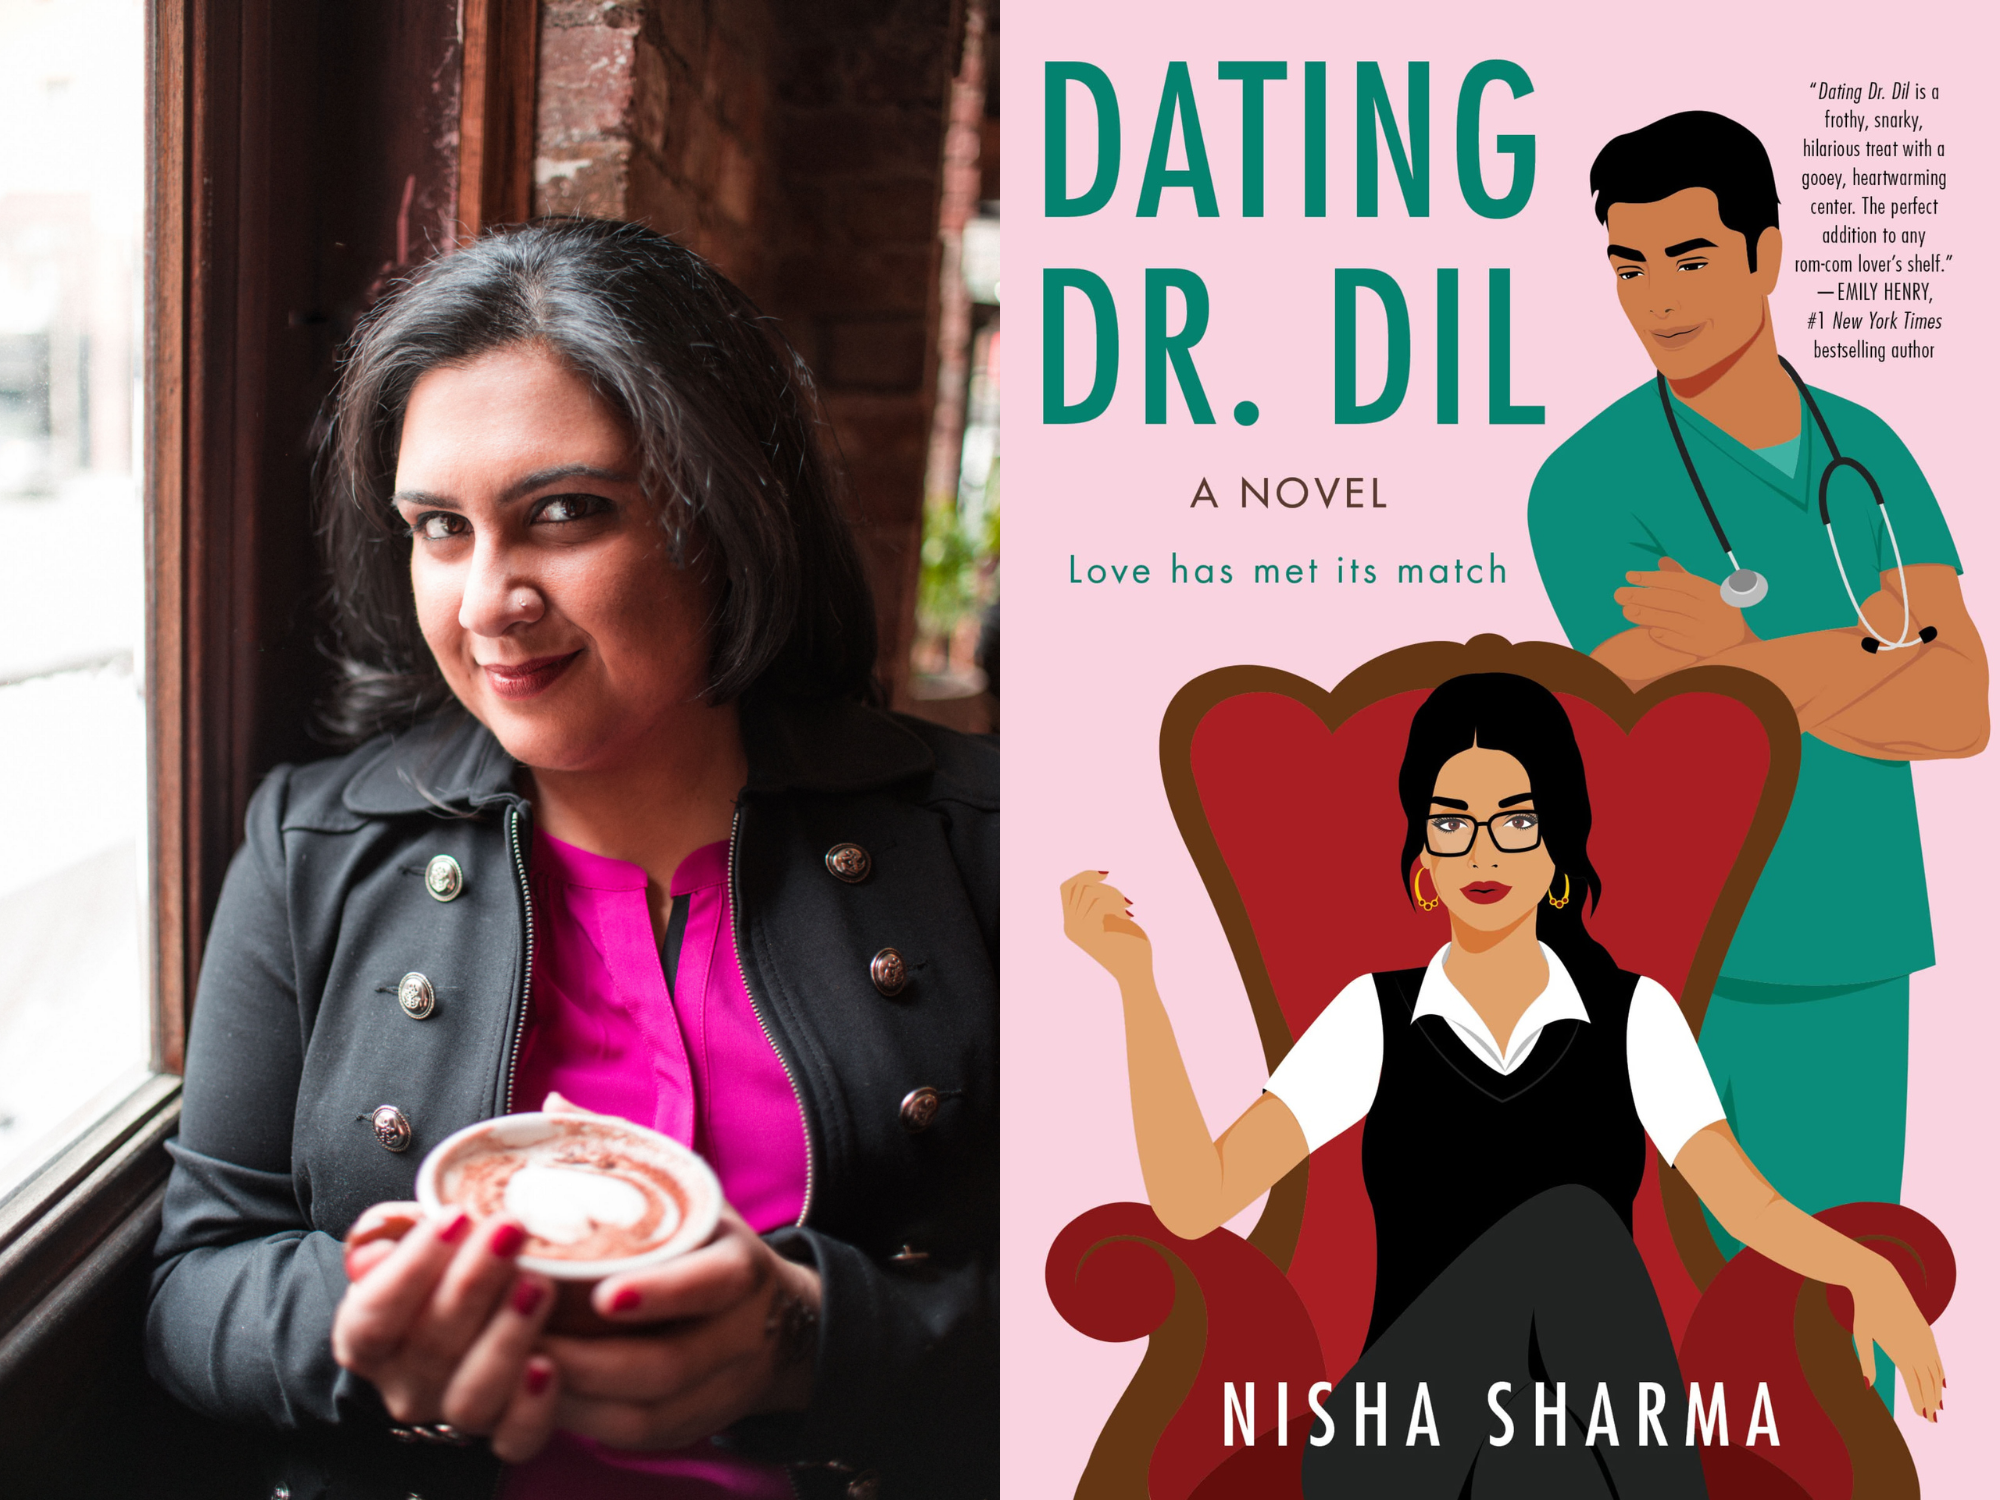 Dating Dr. Dil by Nisha Sharma author profile photo from Goodreads and book cover